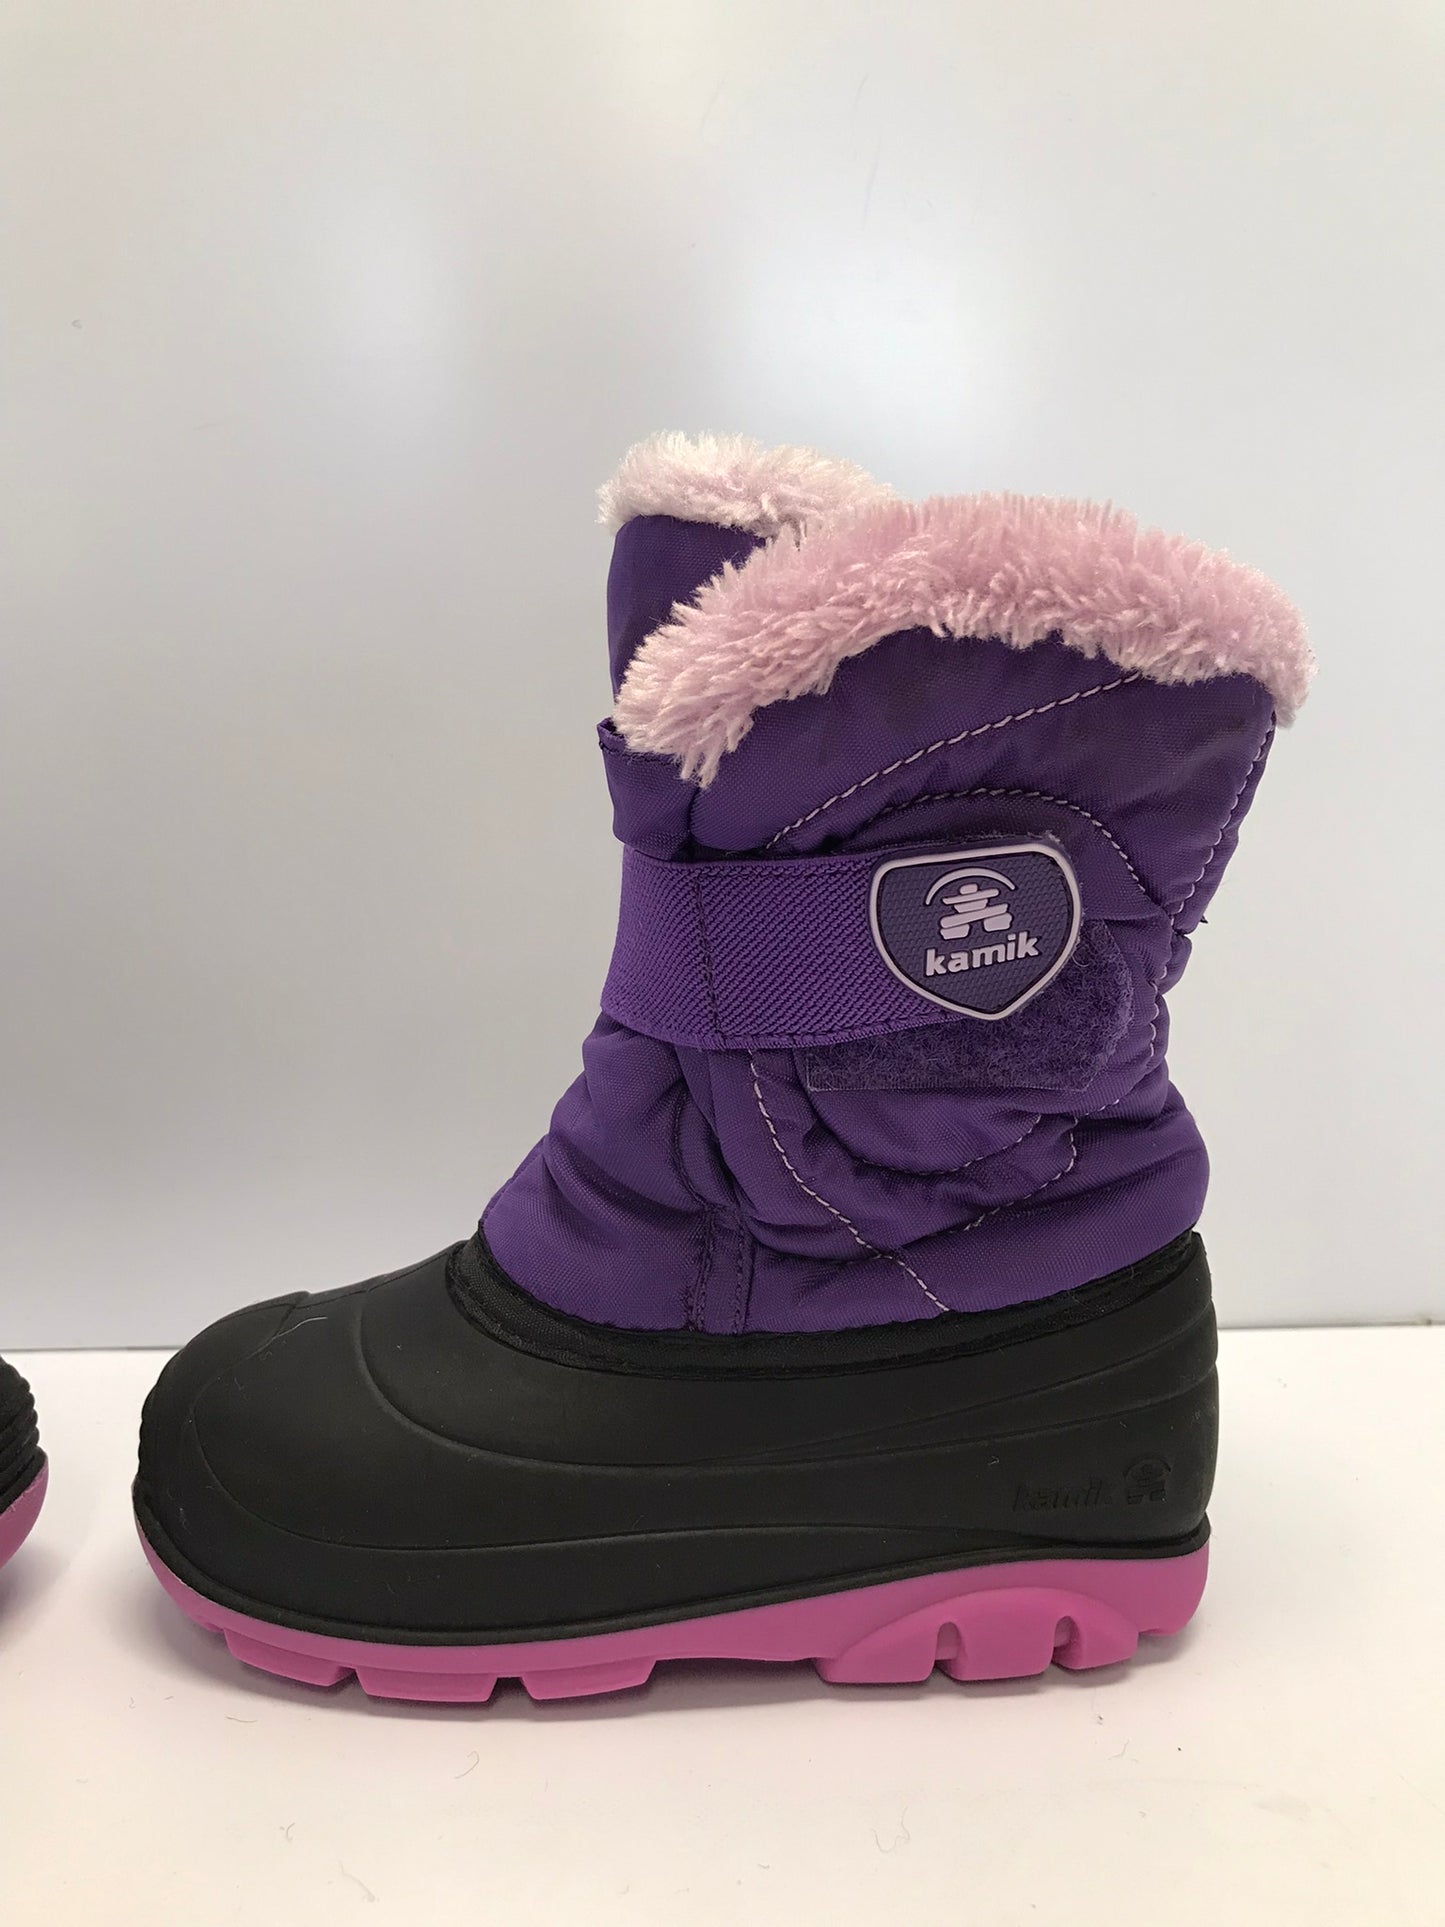 Winter Boots Child Size 10 Toddler Kamik Purple With Faux Fur